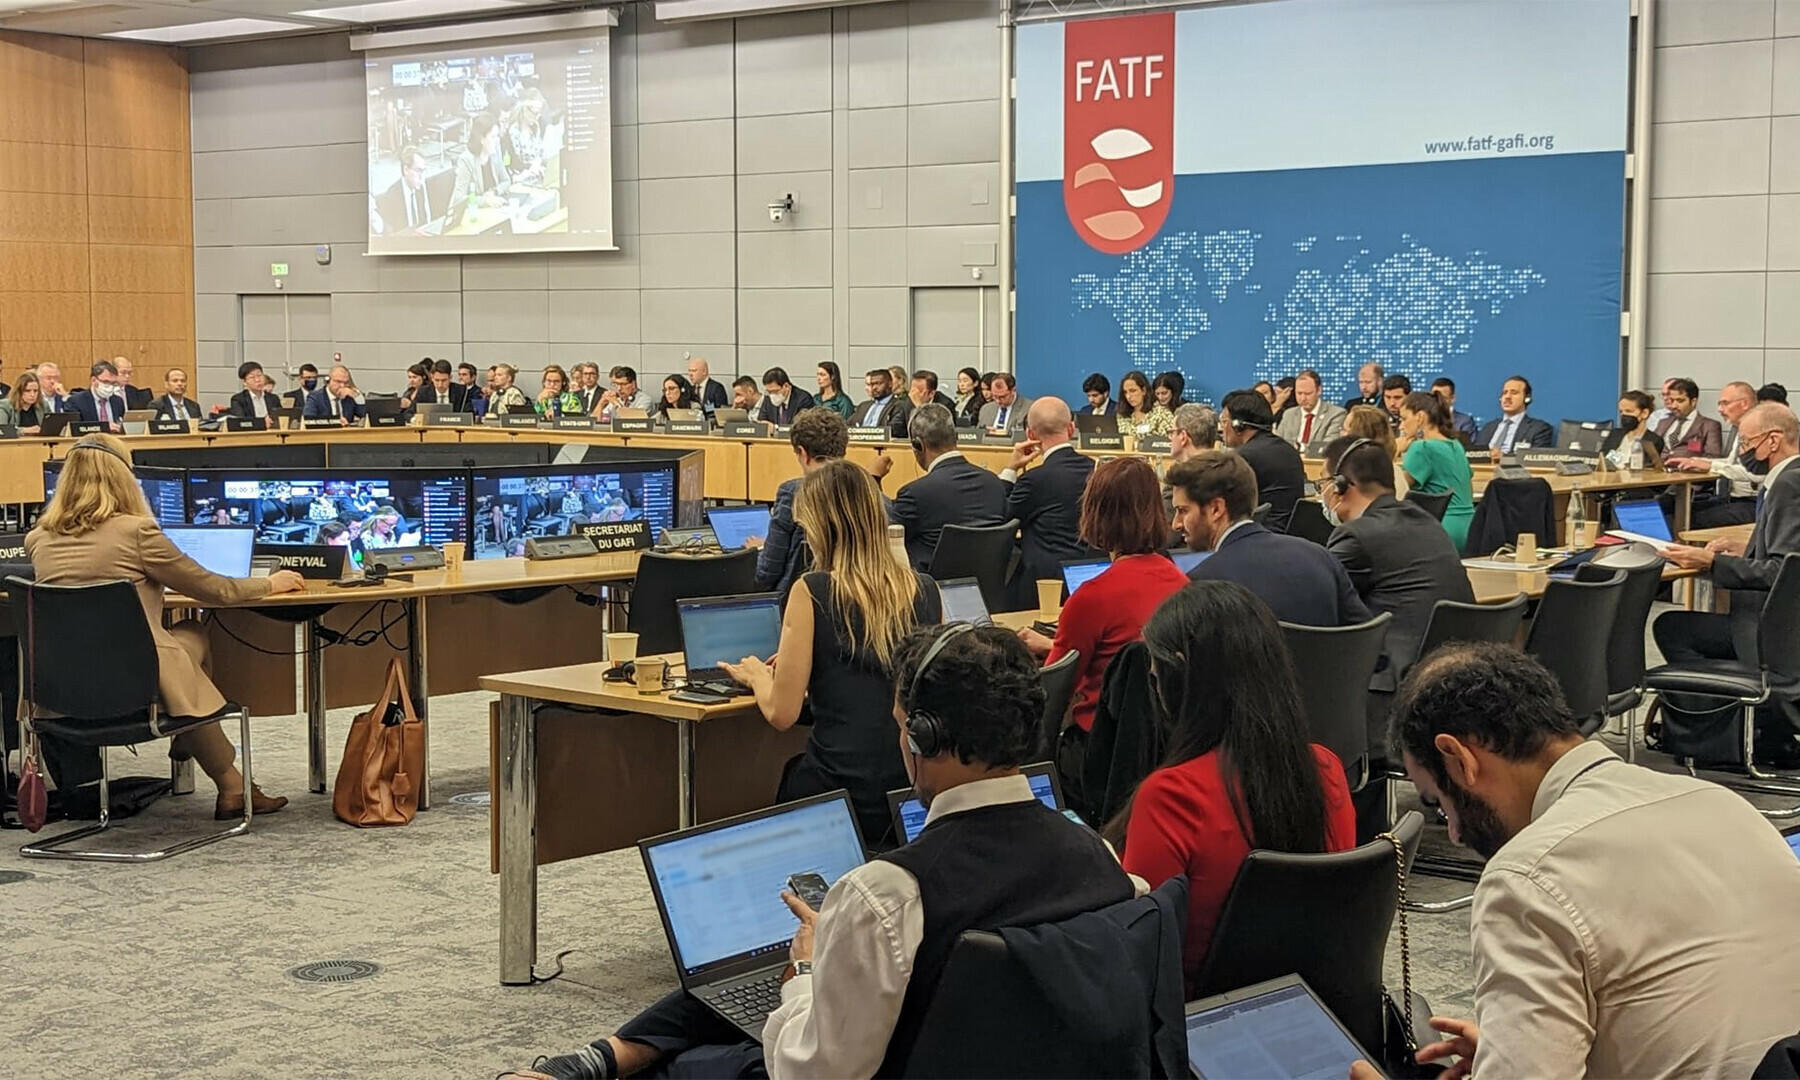 FATF On-Site Review in India: Evaluating Anti-Money Laundering and Counter-Terror Financing Framework